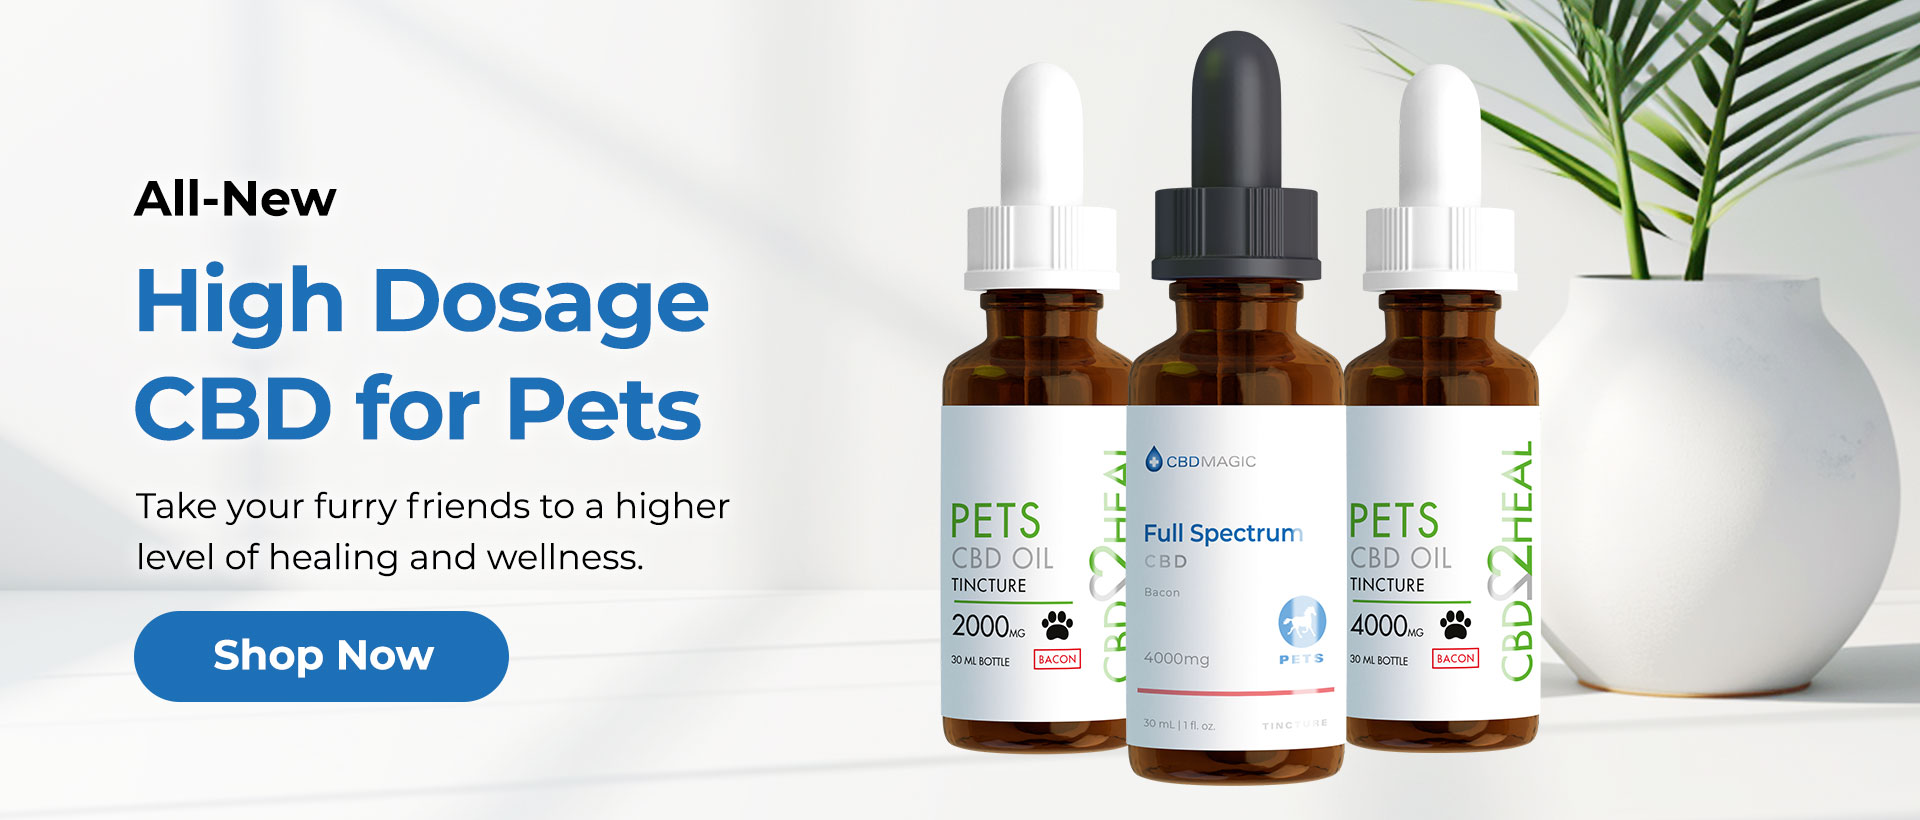 All-New High Dosage CBD for Pets